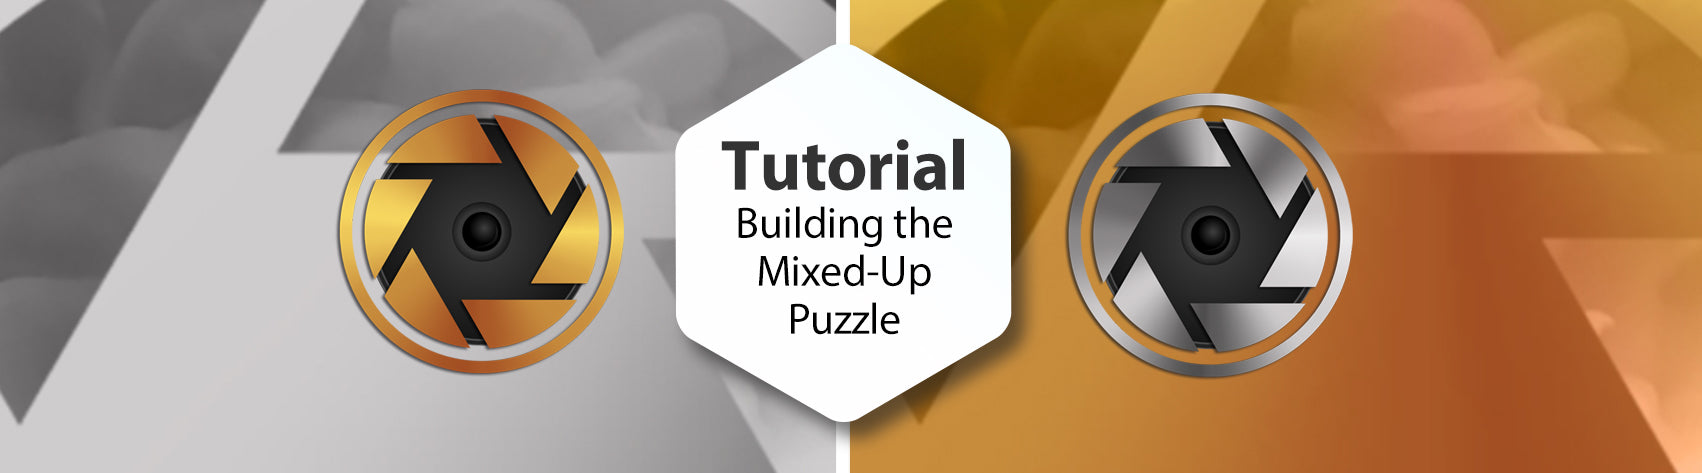 Tutorial - Creating the Mixed-Up Puzzle Style